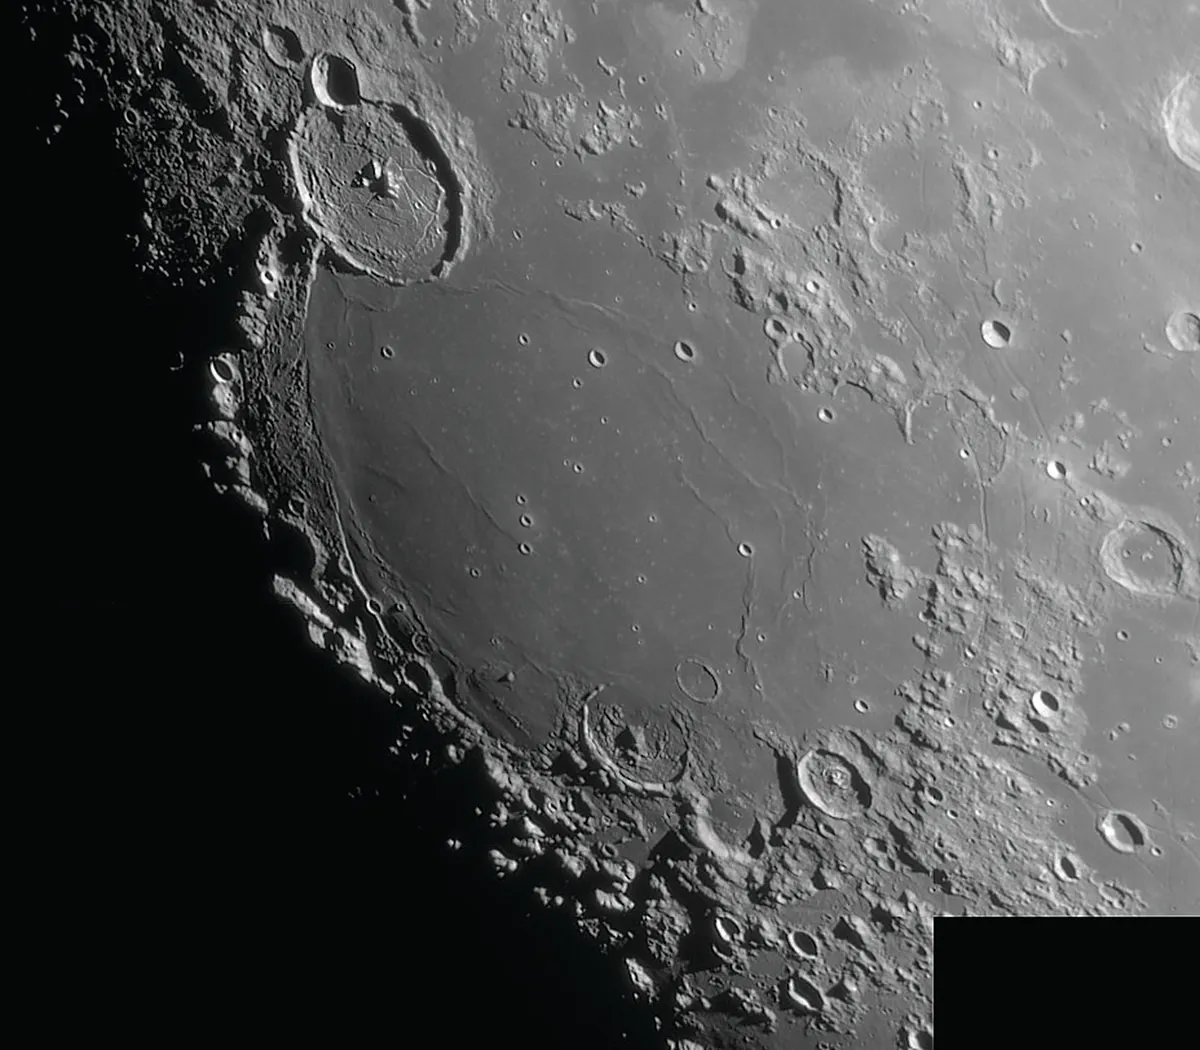 The Moon's Mare humorum. Credit: Pete Lawrence